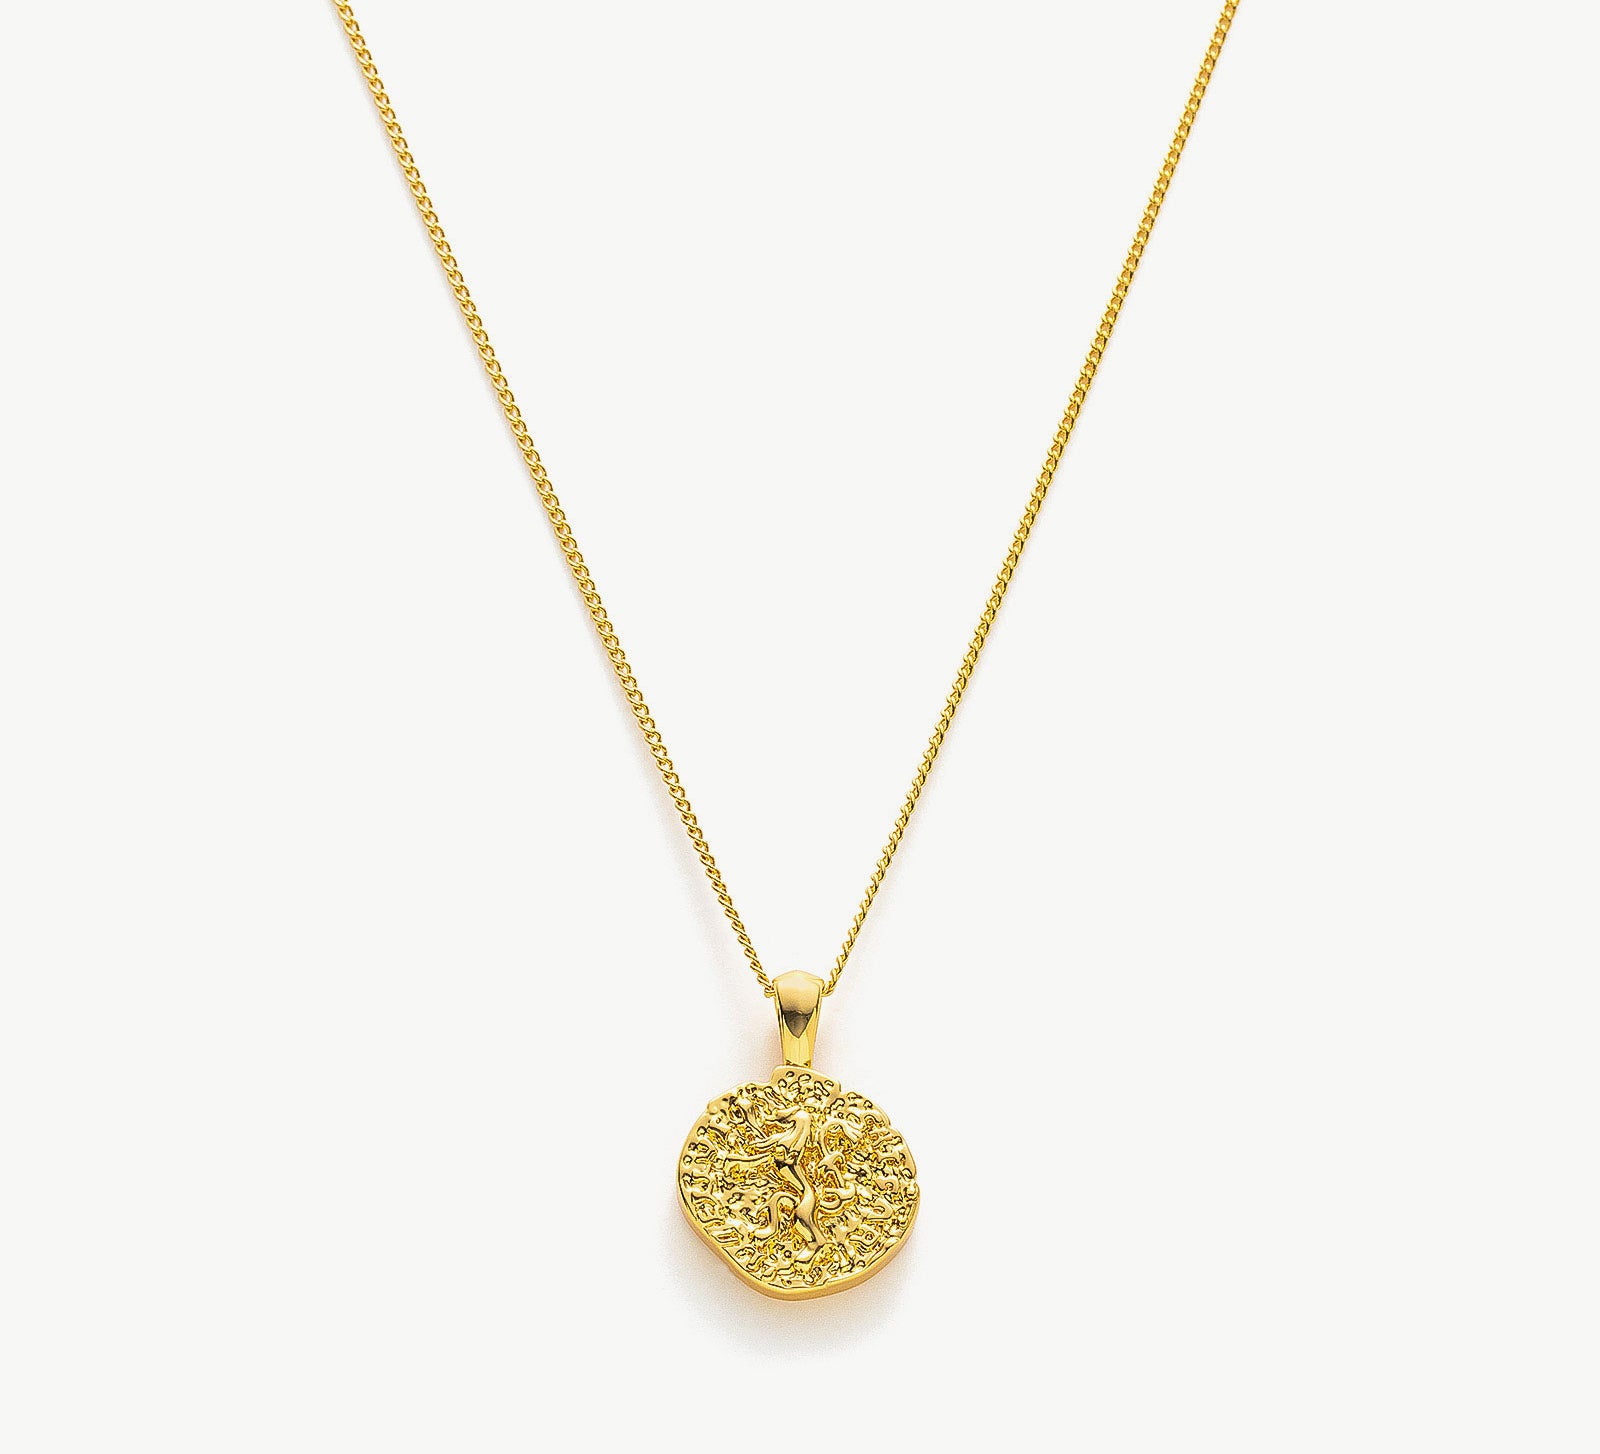 Gold Hammered Disc Pendant Necklace, a symbol of artisanal elegance, featuring a handcrafted gold hammered disc pendant on a delicate chain, adding a touch of handmade charm and sophistication to your neckline